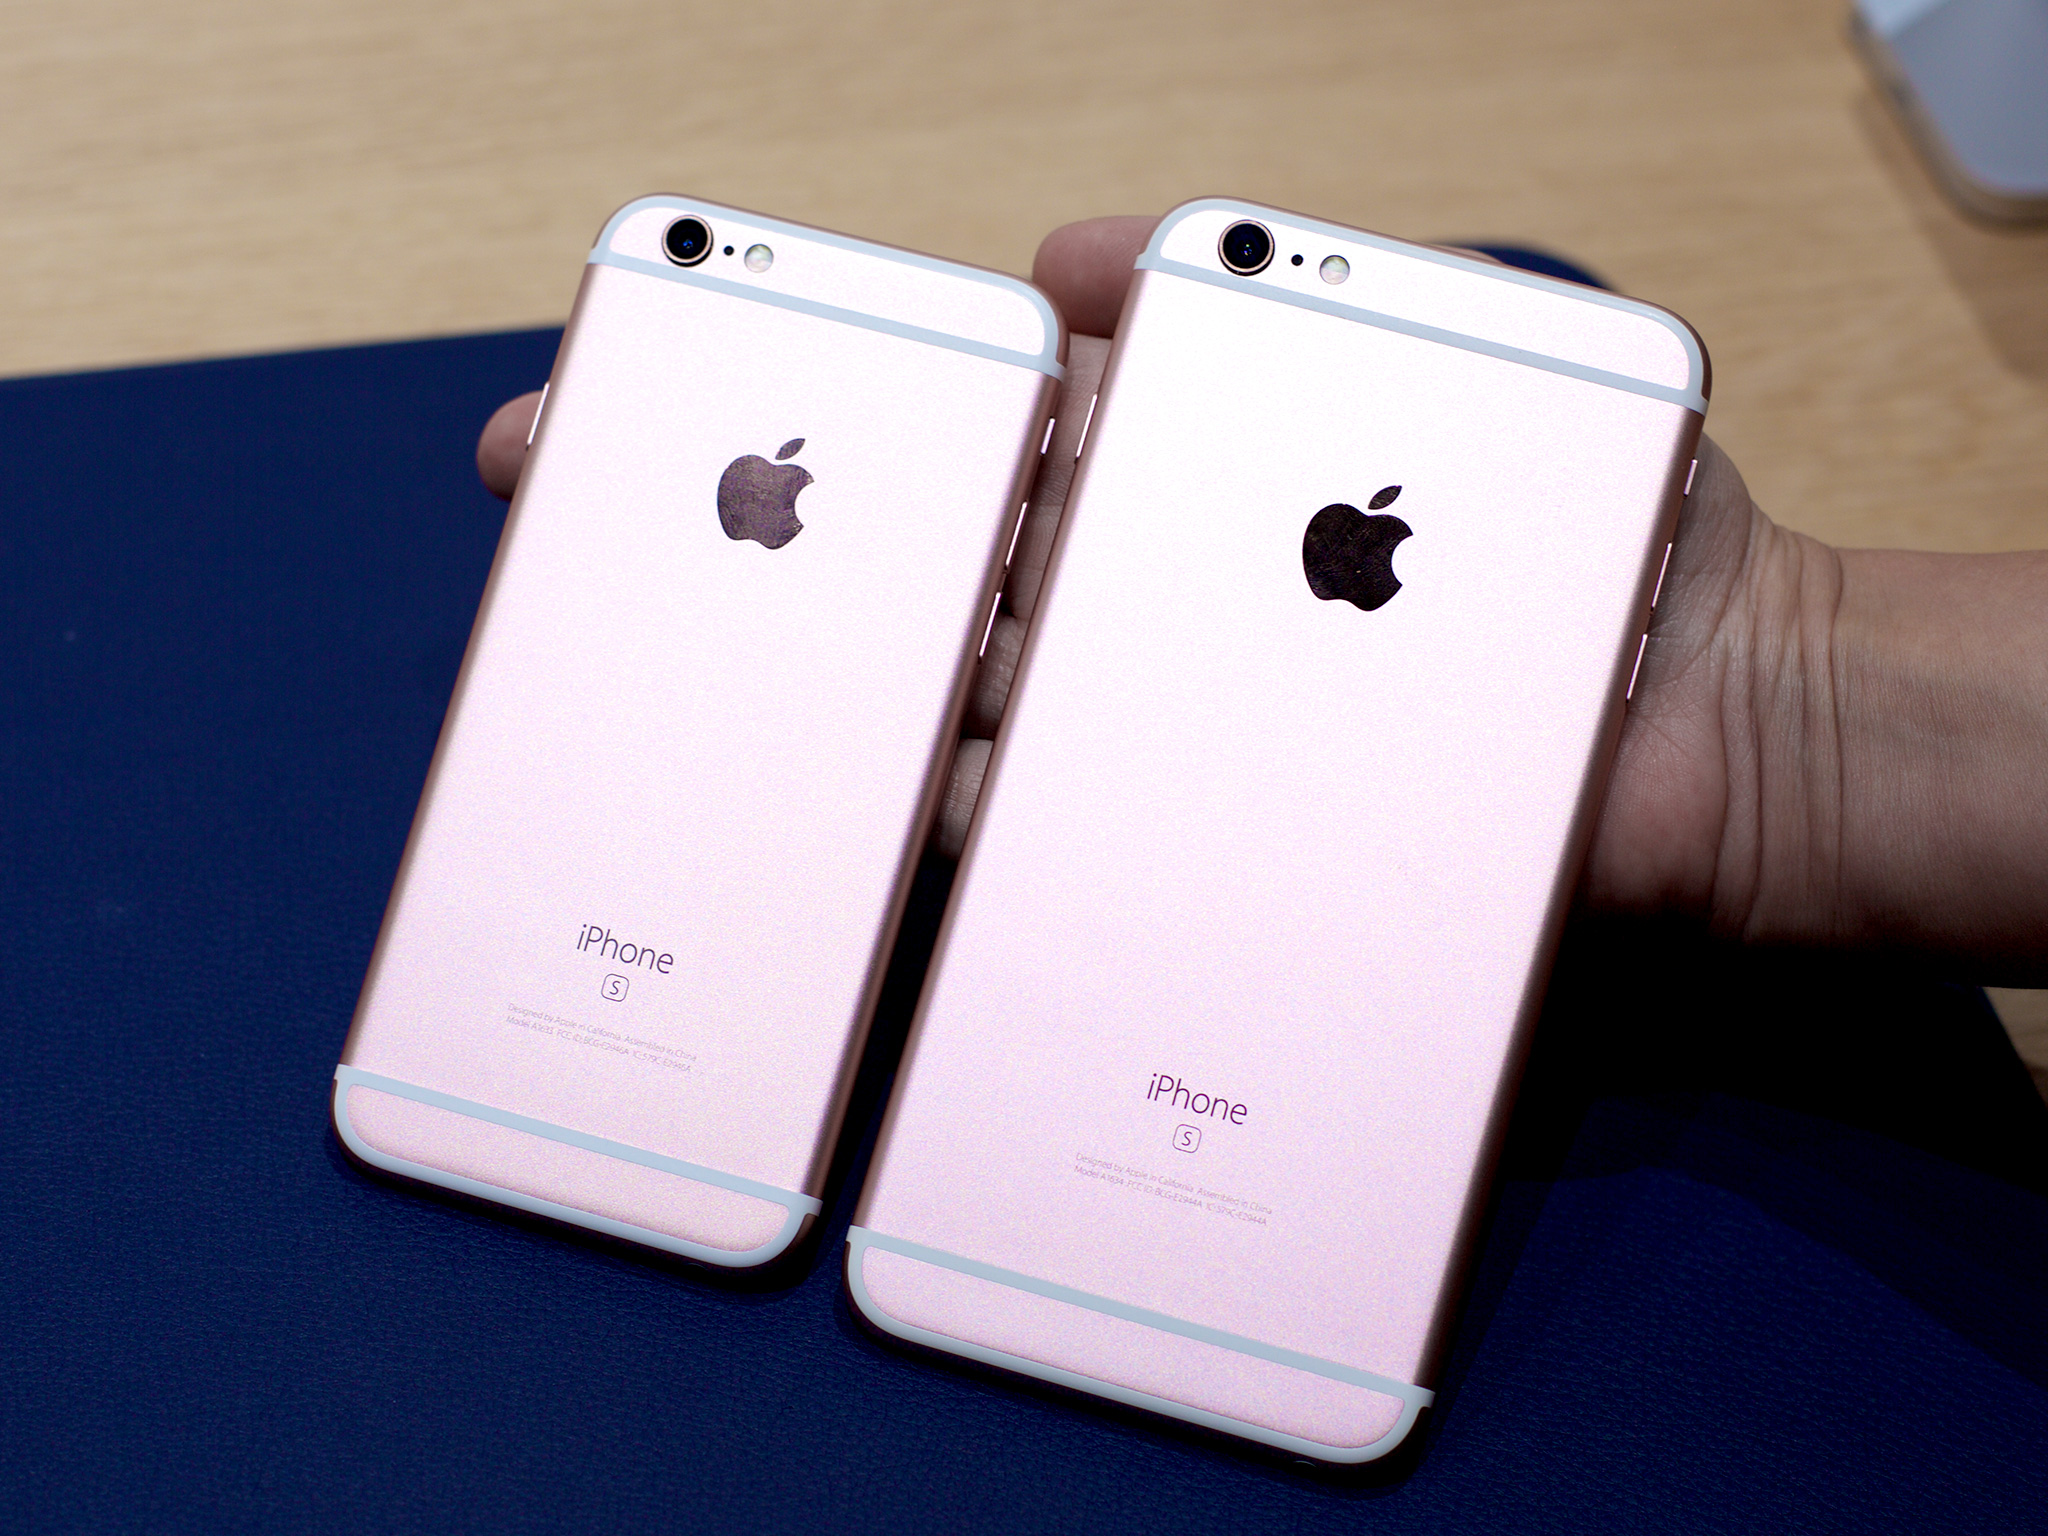 Måne sagtmodighed Krav What size iPhone should you get: iPhone 6s or iPhone 6s Plus? | iMore